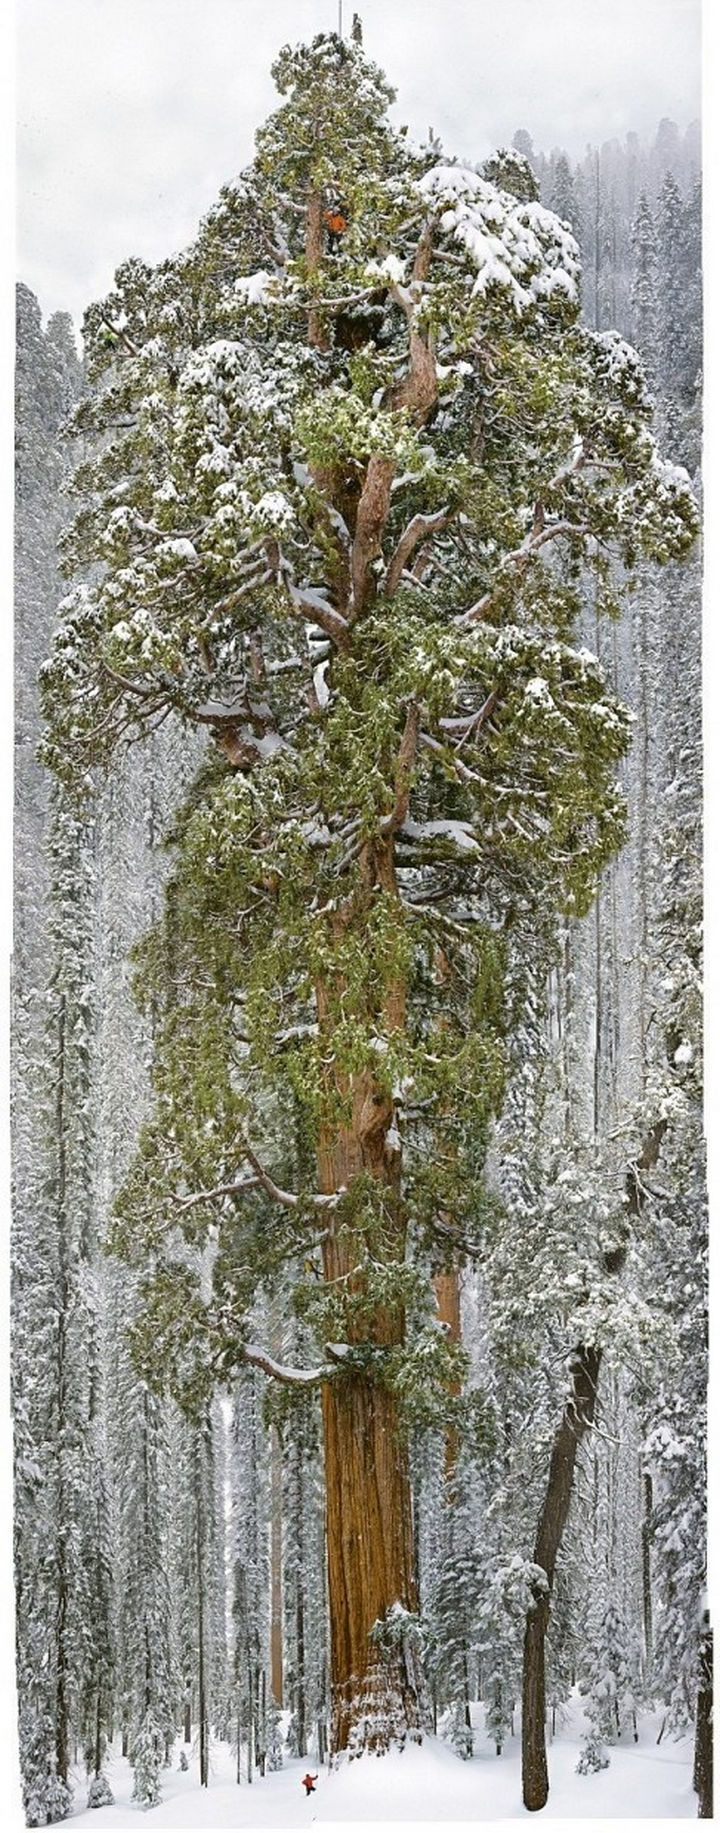 "The President" sequoia tree is the second largest tree in the world. It is 27 feet in diameter, 247 feet in length, has 2 billion leaves, and is 3,200 years old!